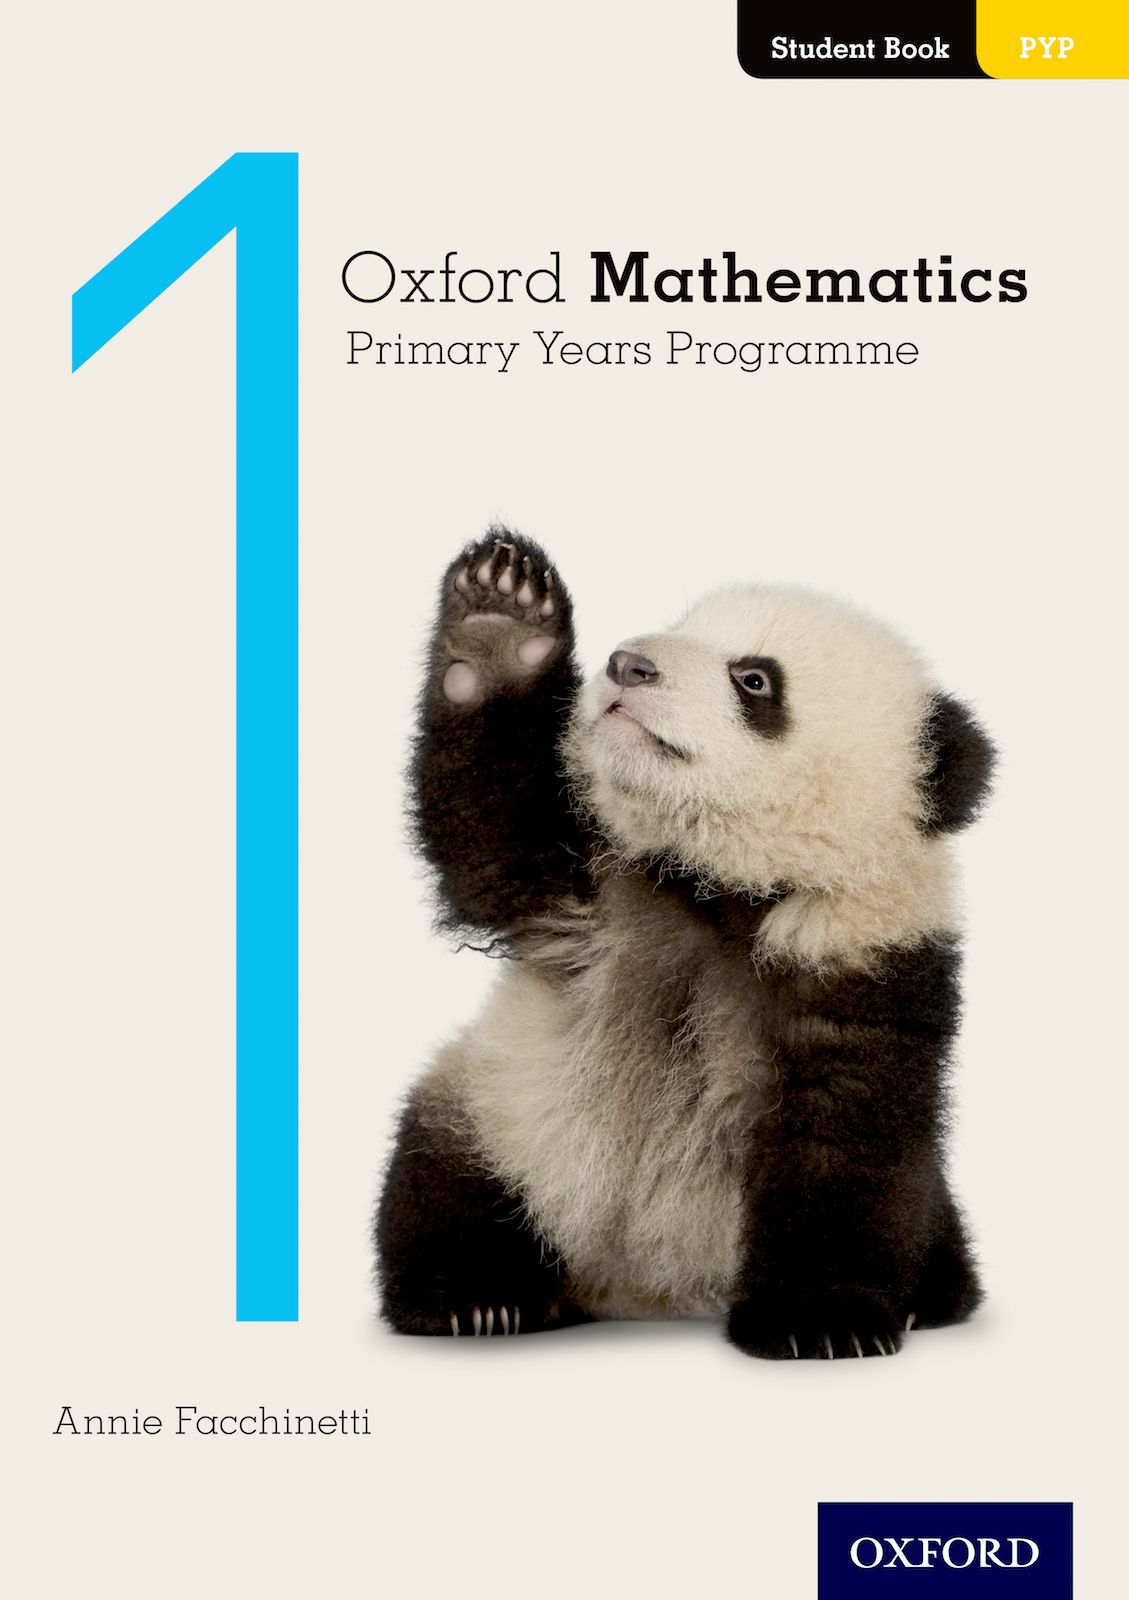 Featured image for “Oxford Mathematics Primary Years Programme Student Book 1”